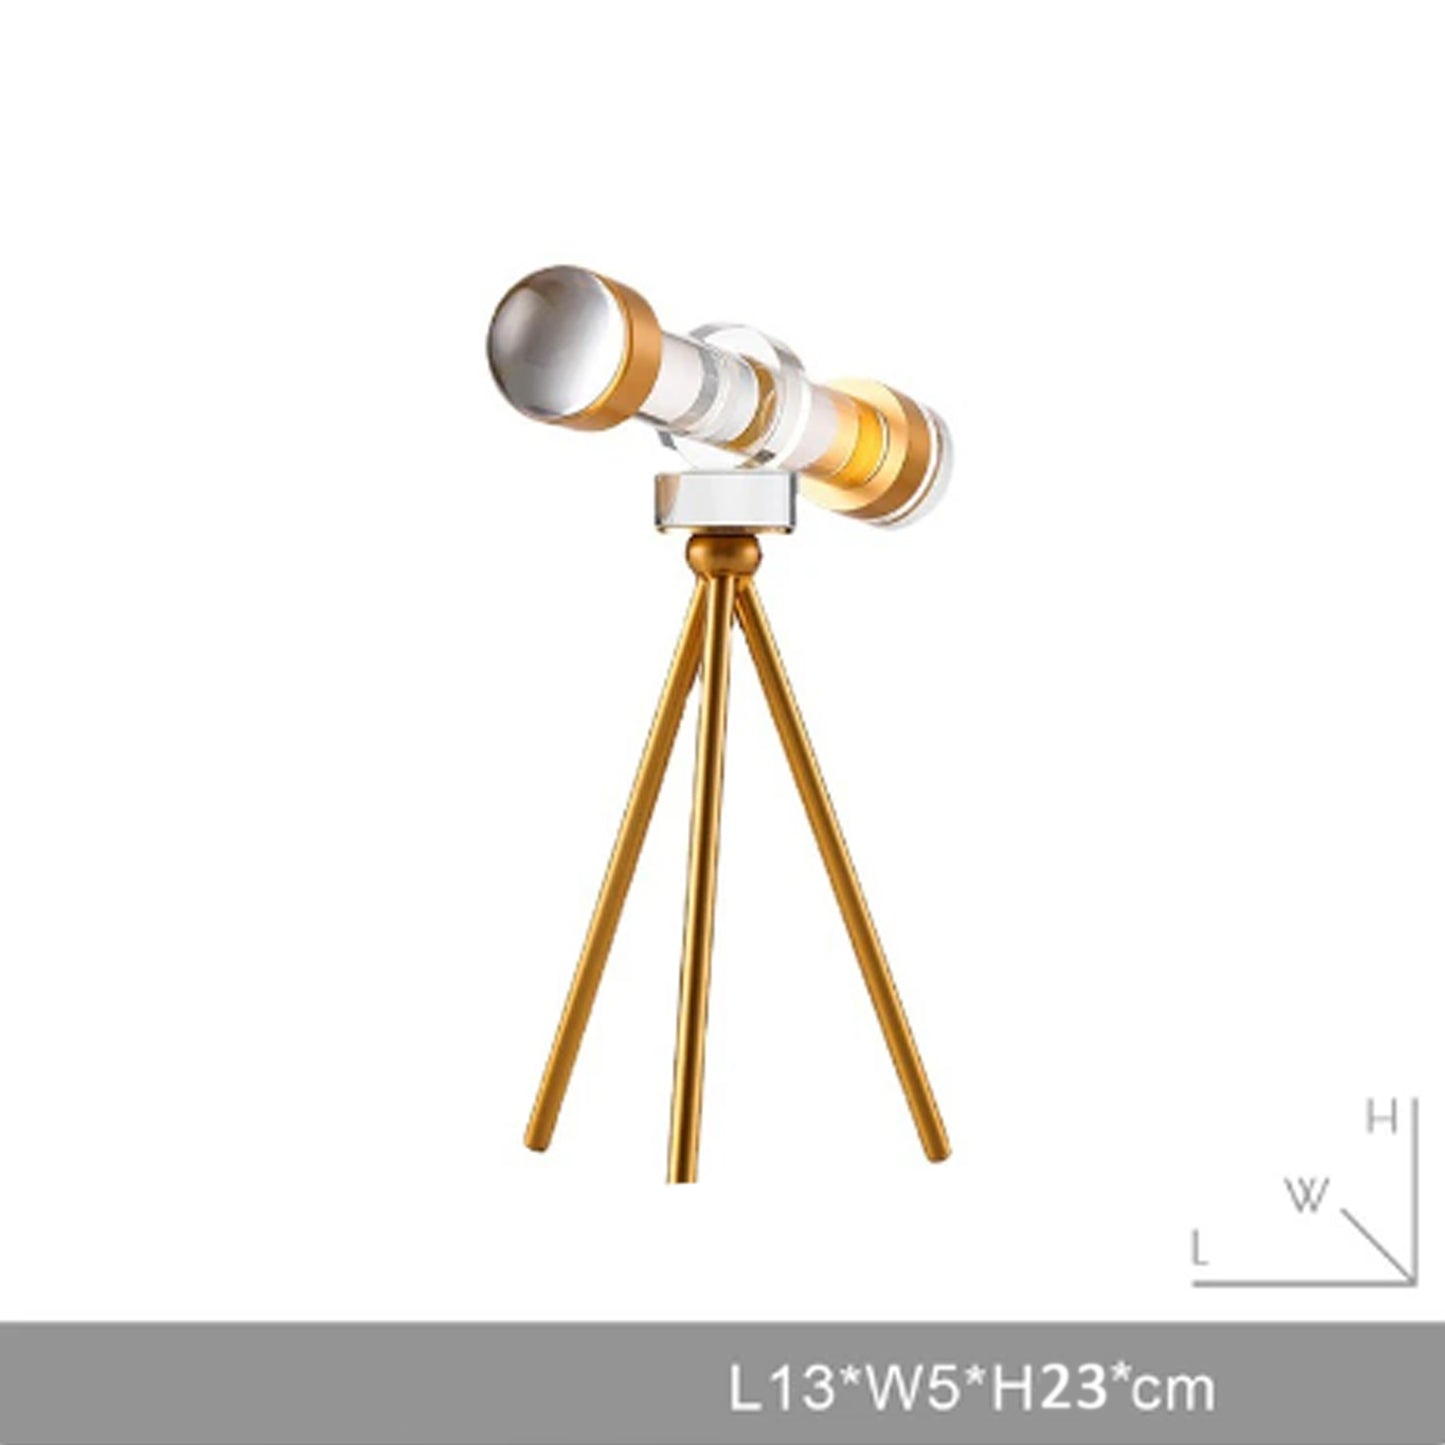 Solid Crystal Hand-Crafted Gold Tripod Camera Sculpture